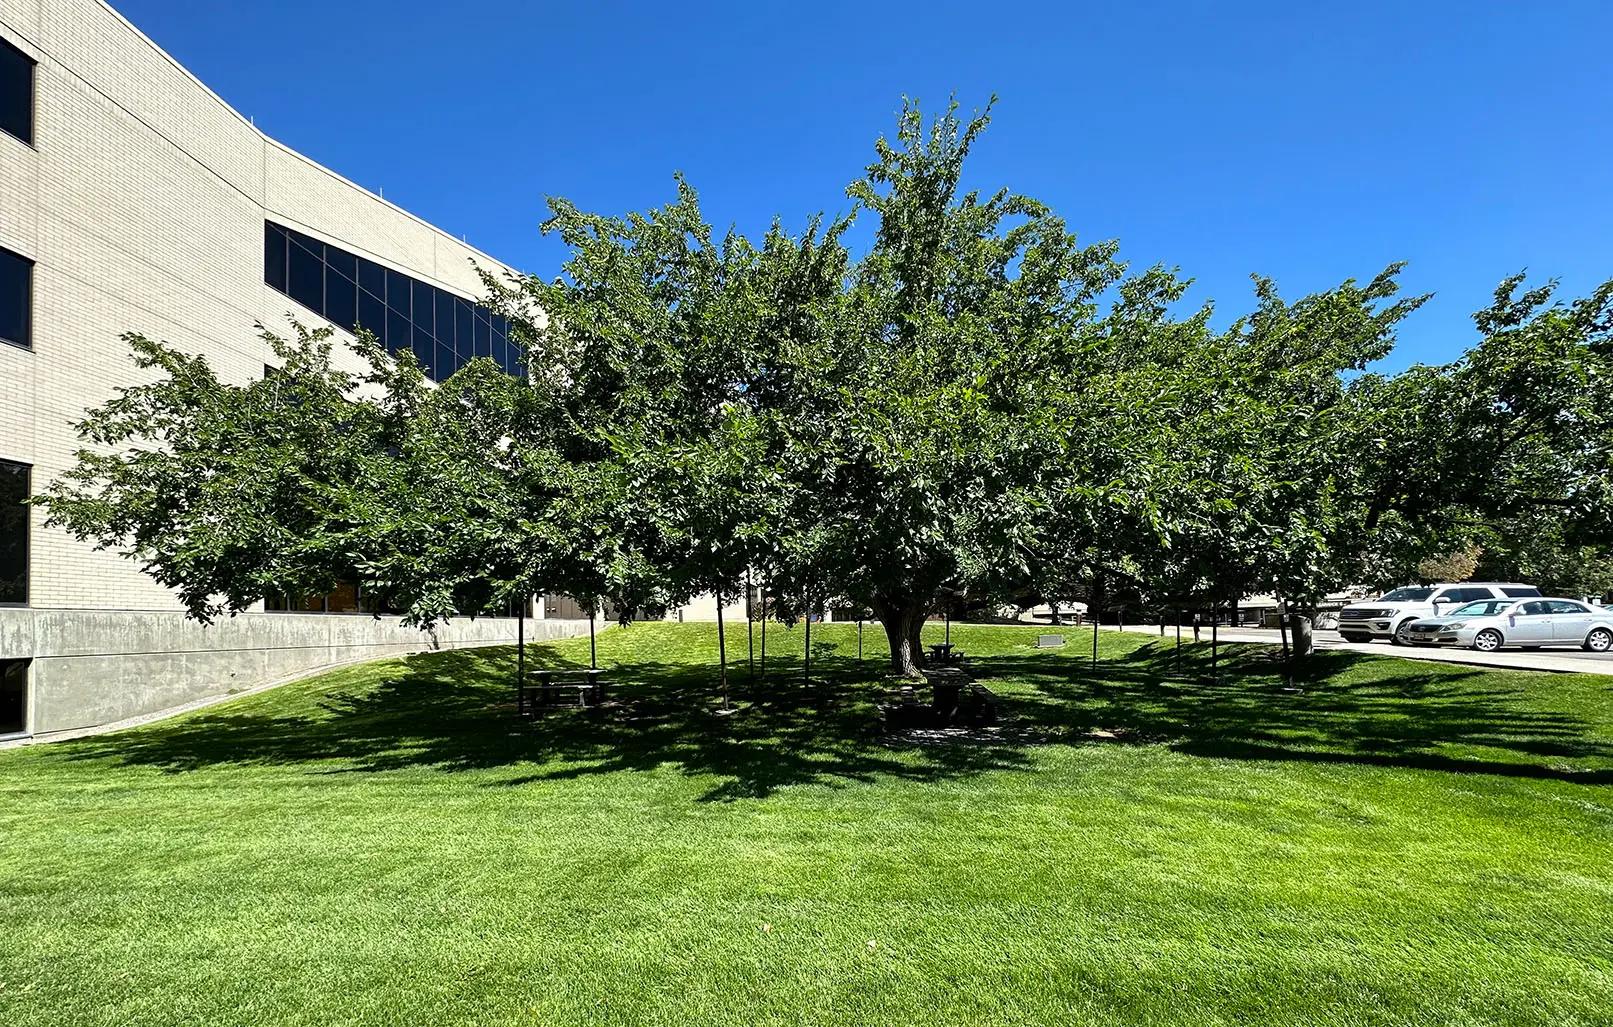 Elm tree side view outside of the Utah County Administration Building